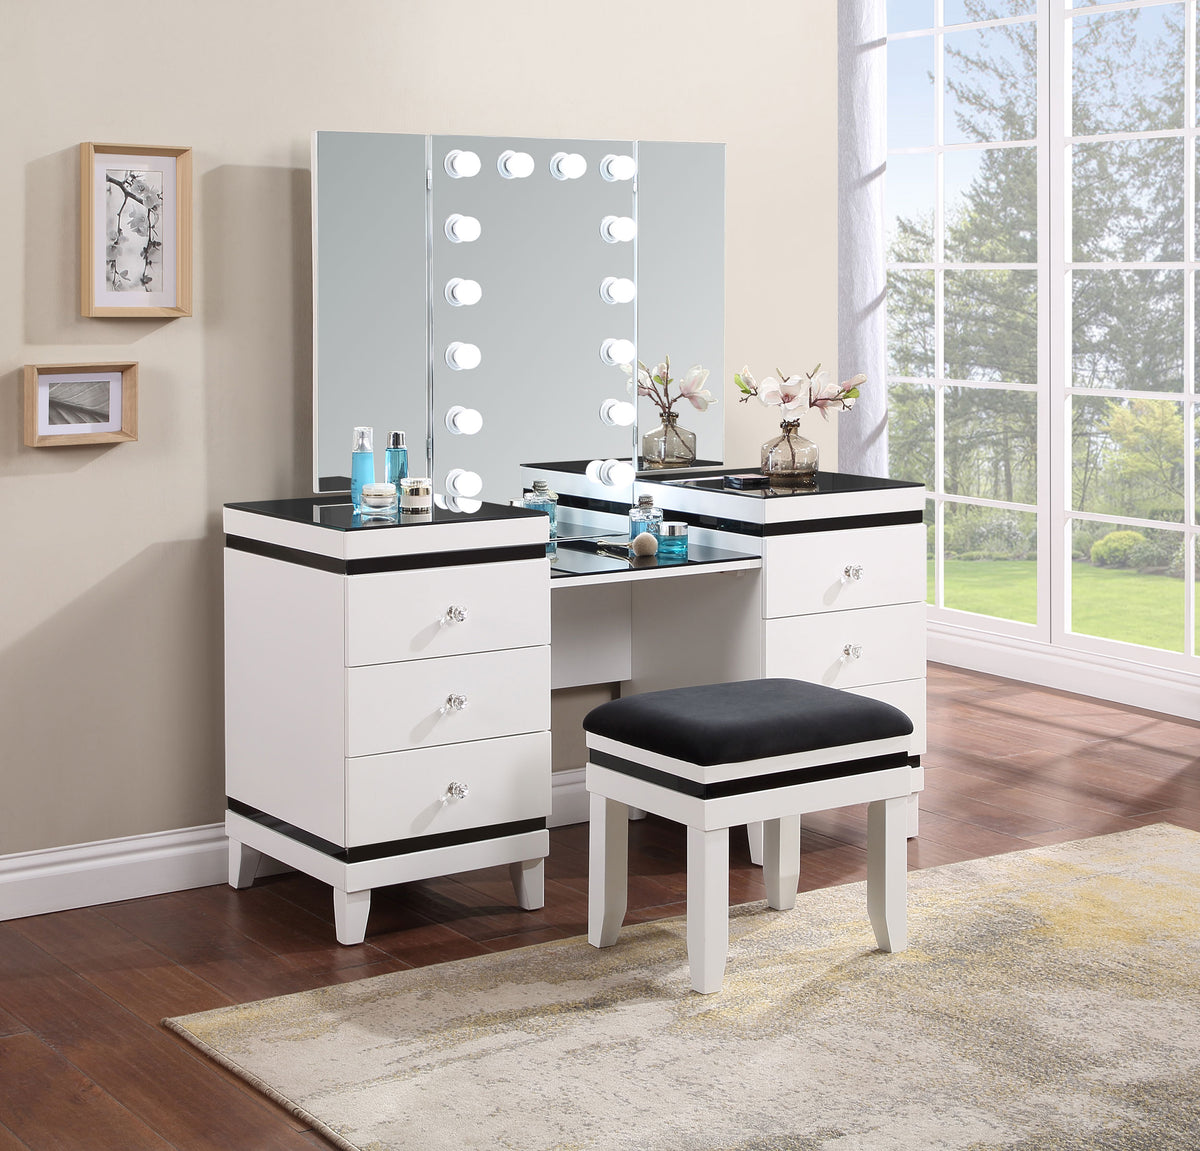 Talei 6-drawer Vanity Set with Hollywood Lighting Black and White Talei 6-drawer Vanity Set with Hollywood Lighting Black and White Half Price Furniture